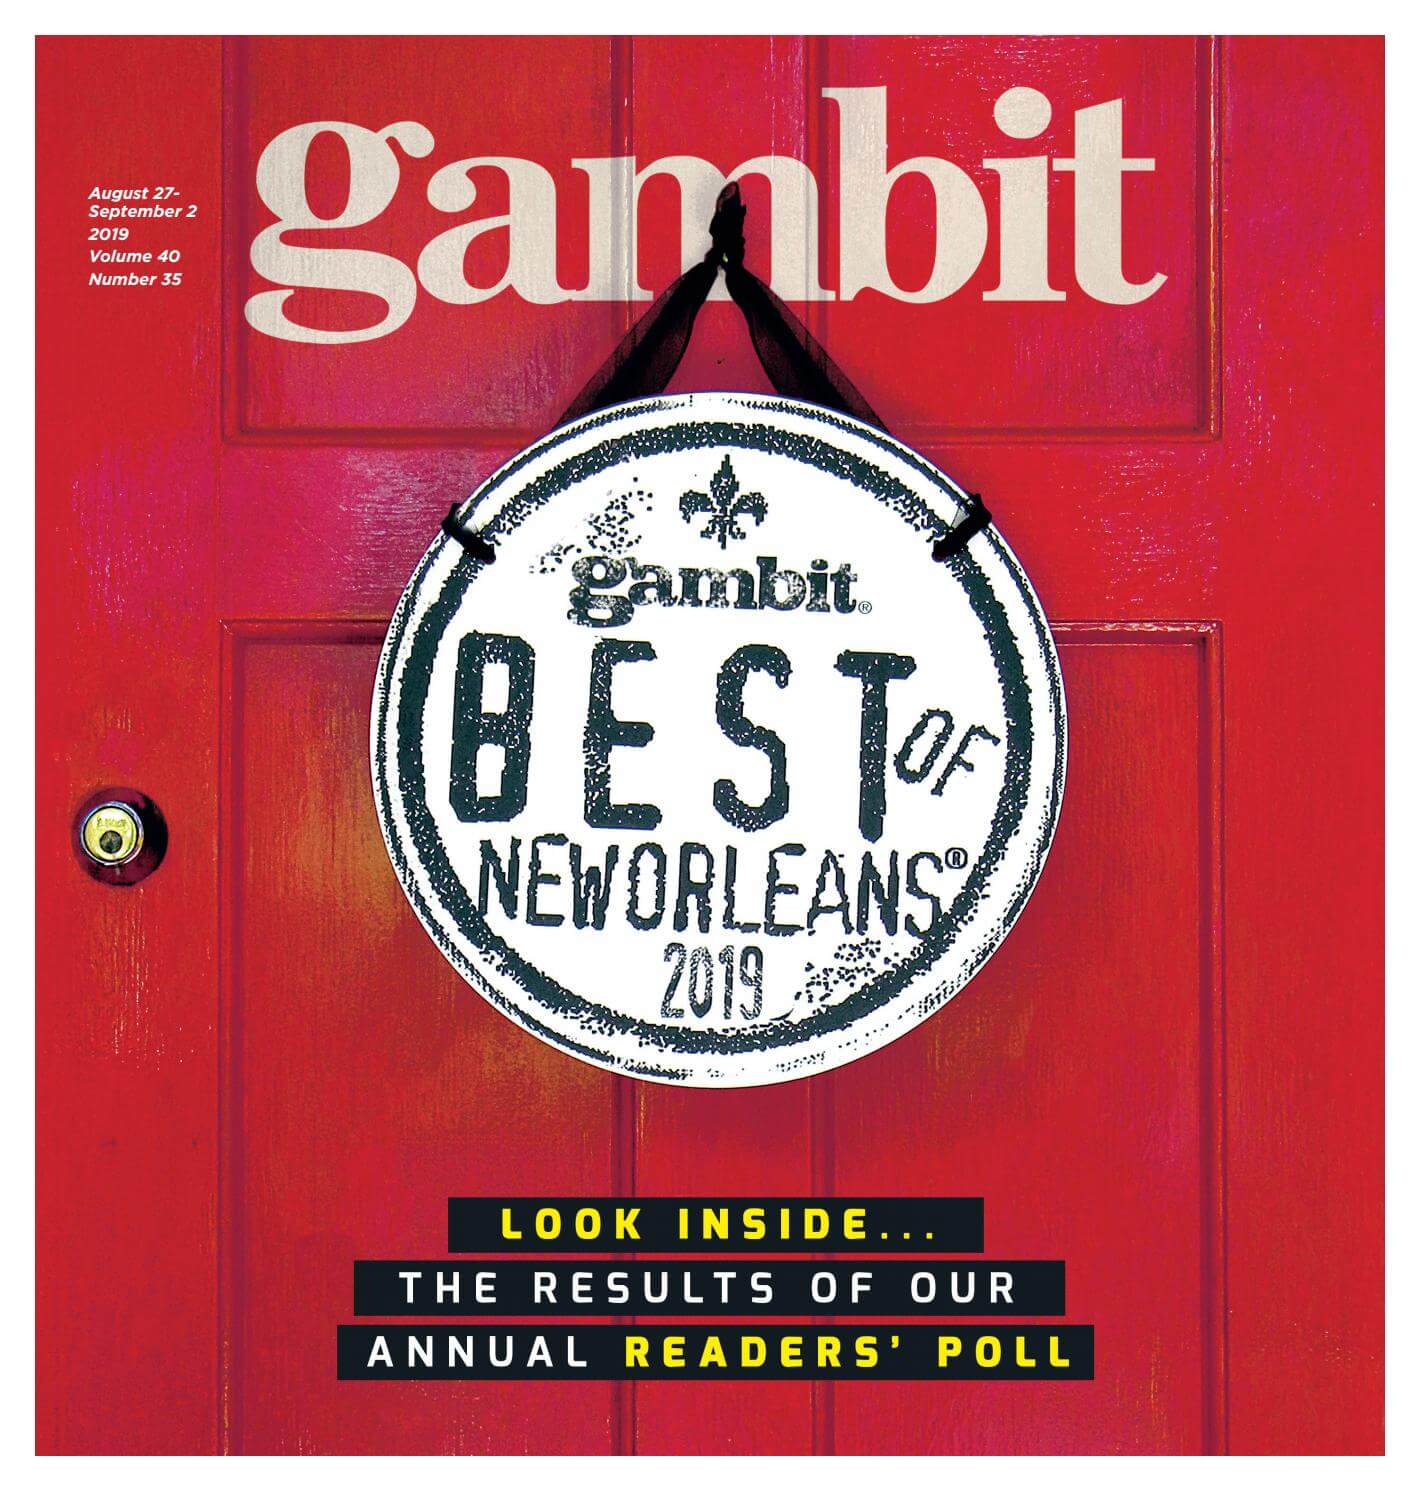 New Orleans Newspapers 08 Gambit